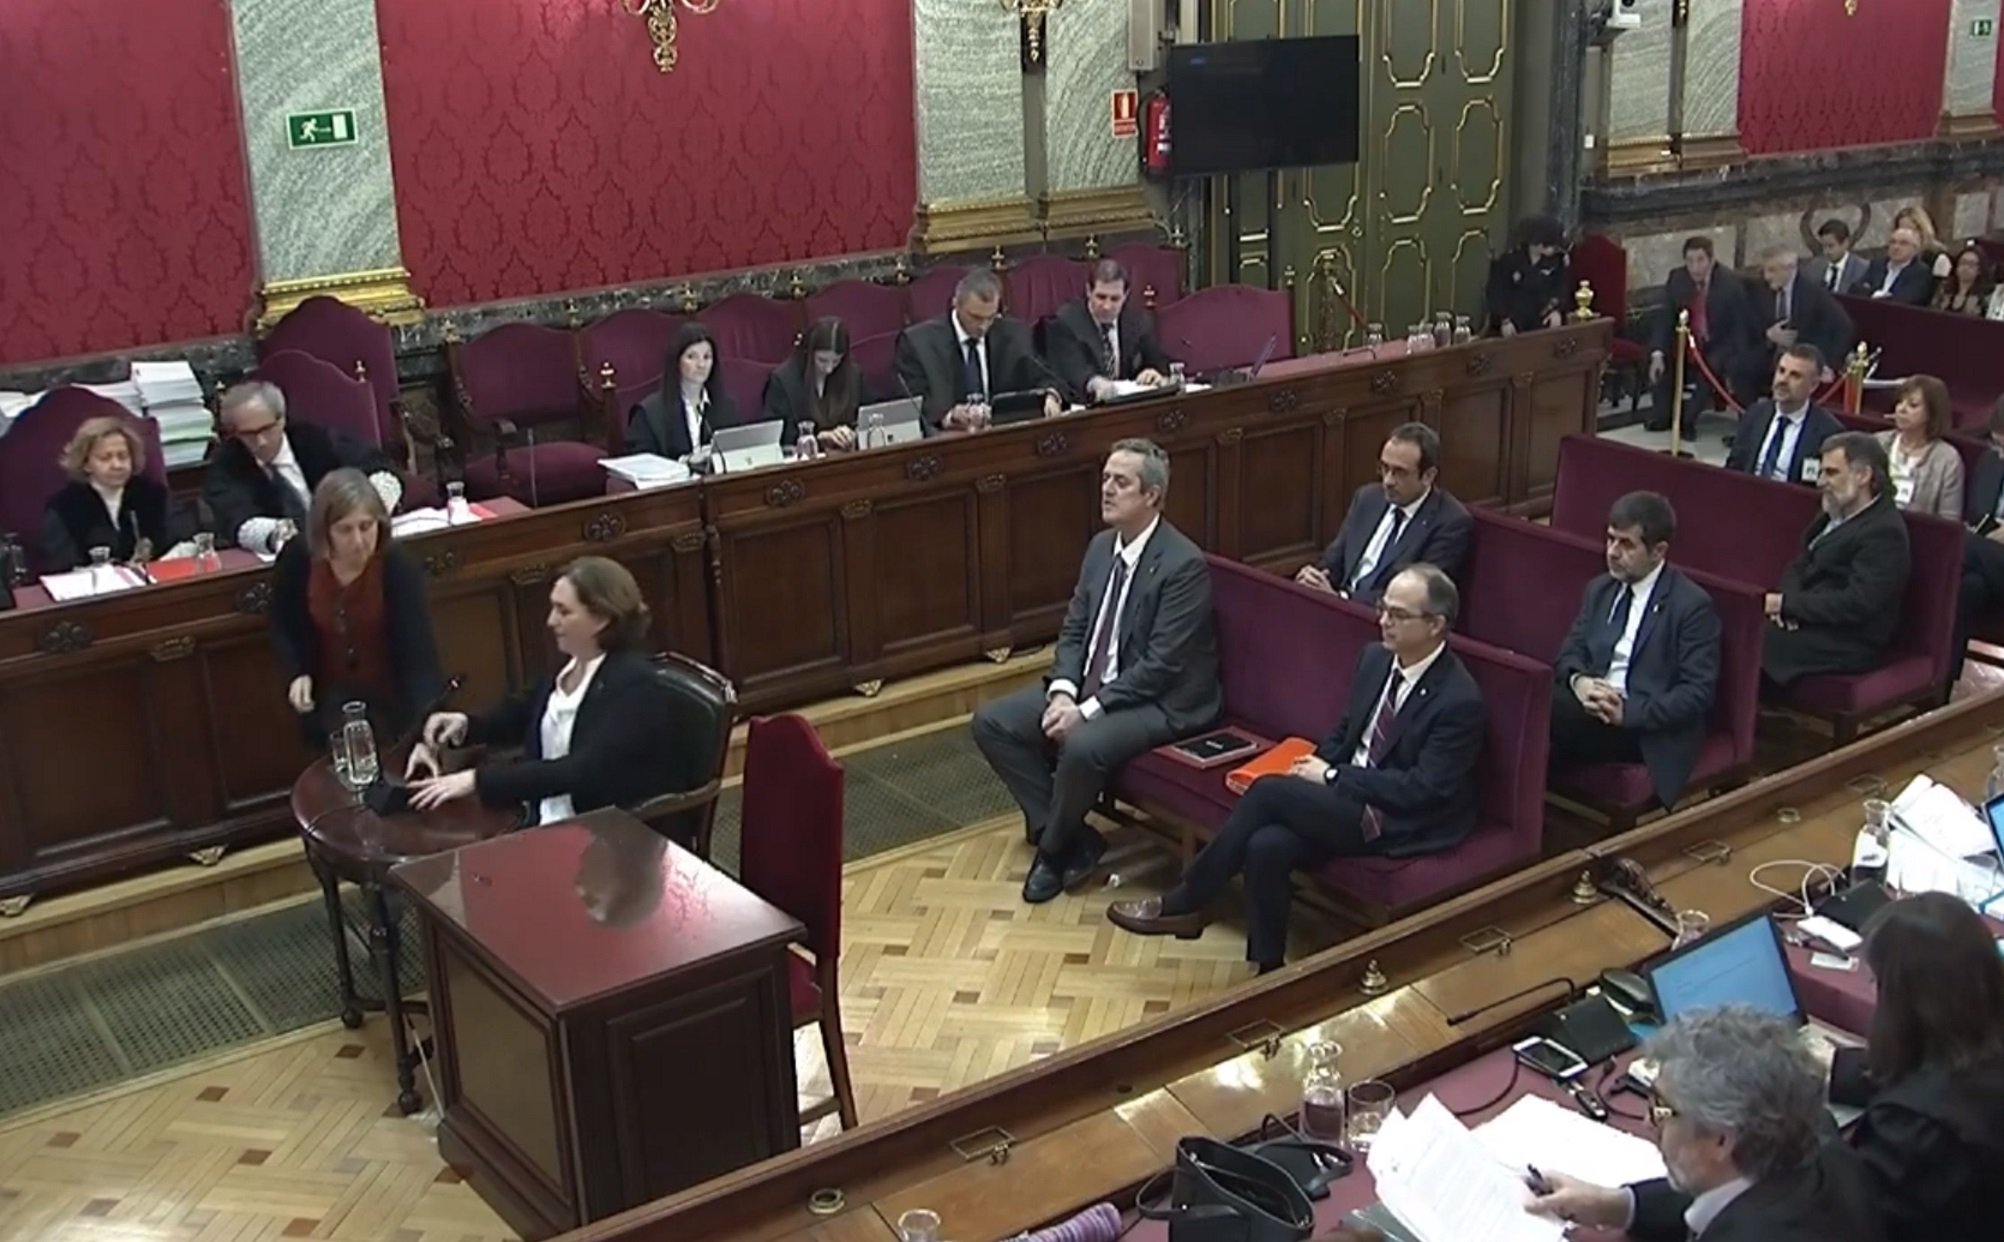 Political witnesses in the Catalan trial: "feeling of a state of emergency" and "weapons of war"